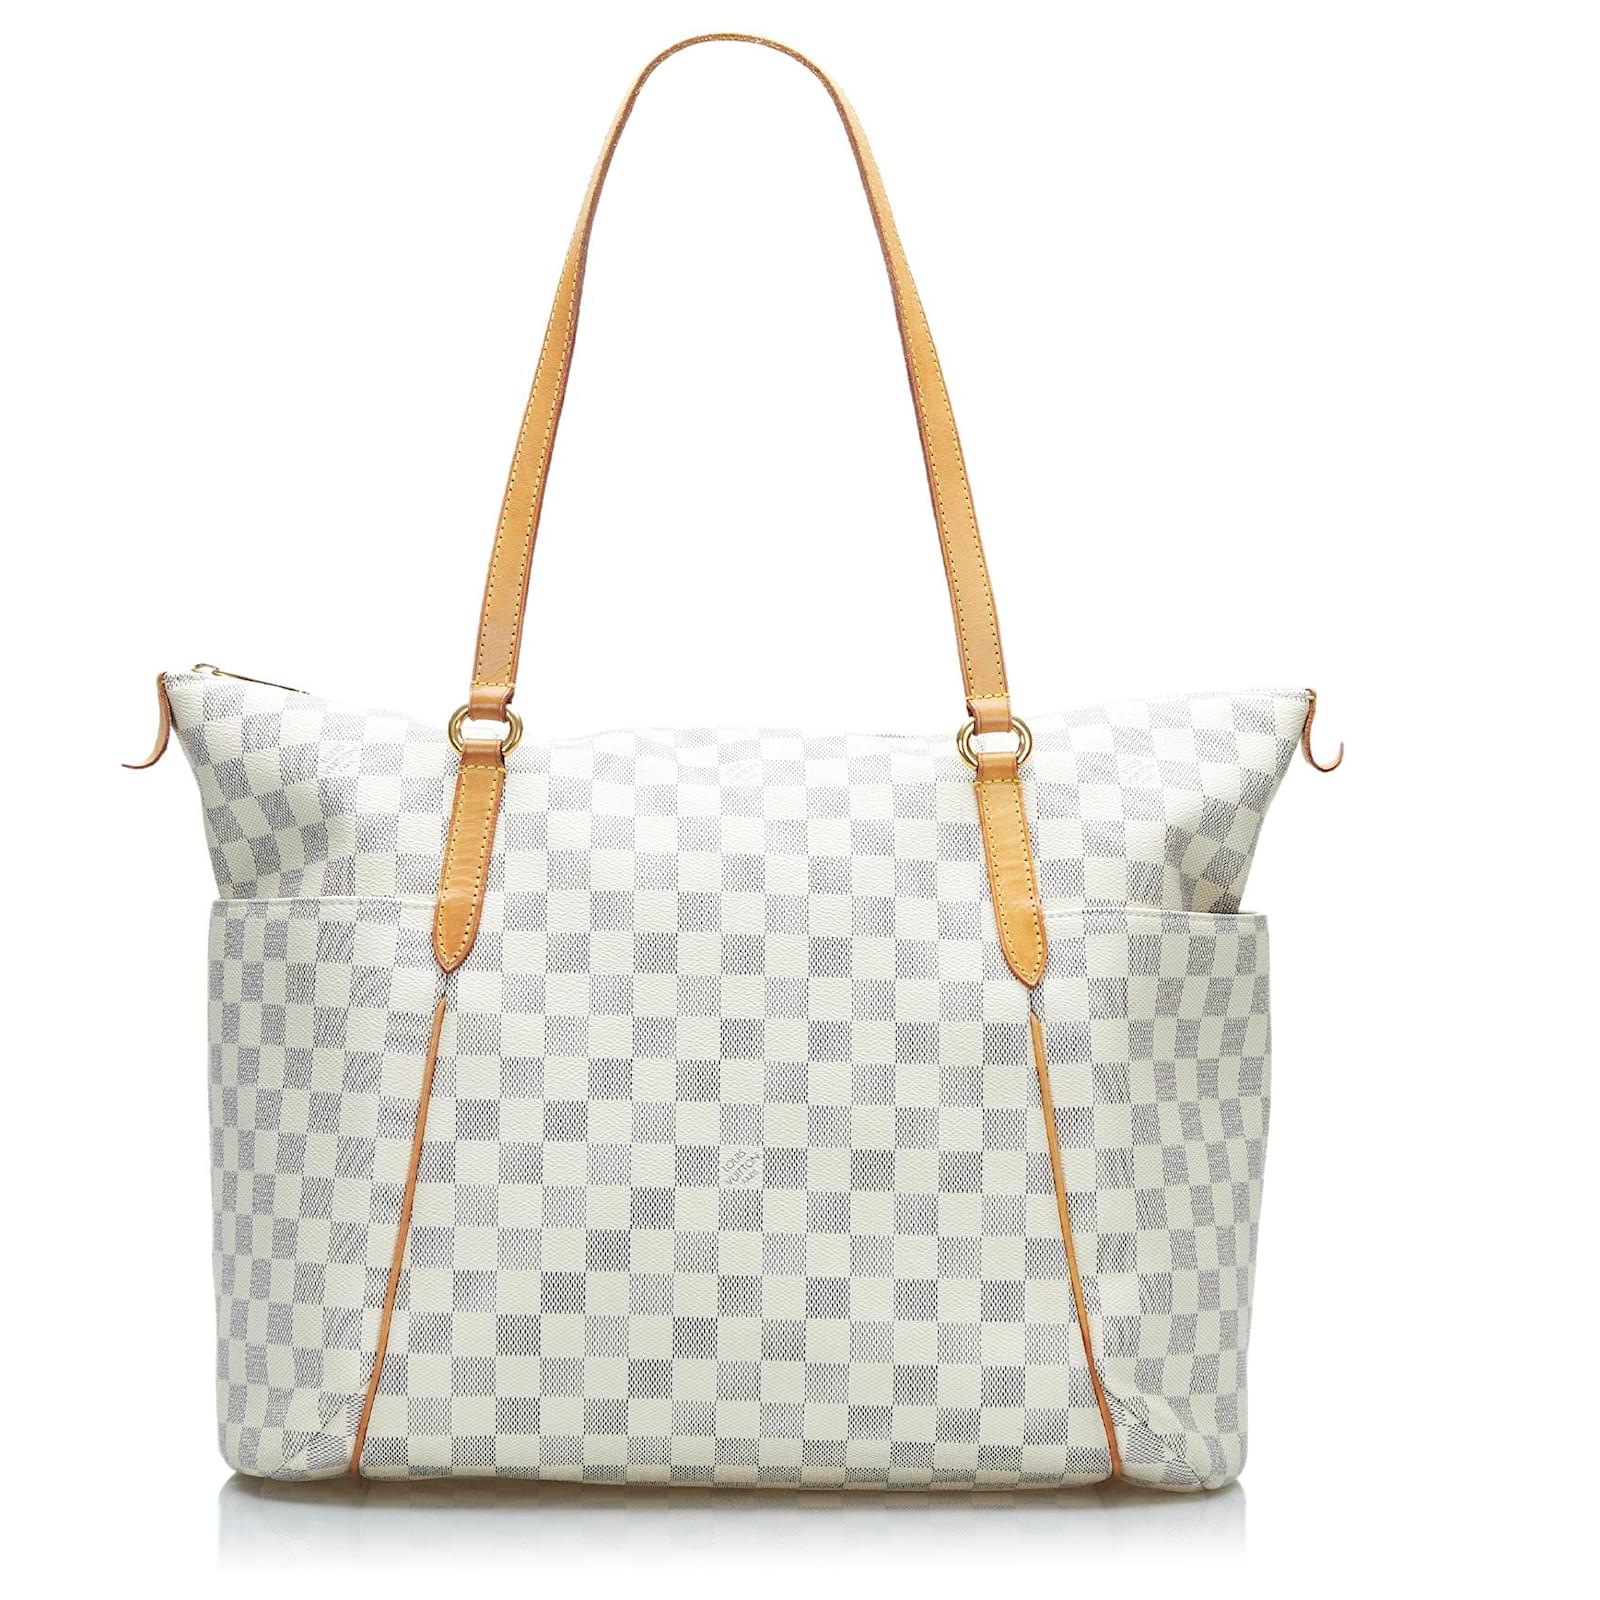 damier totally mm louis